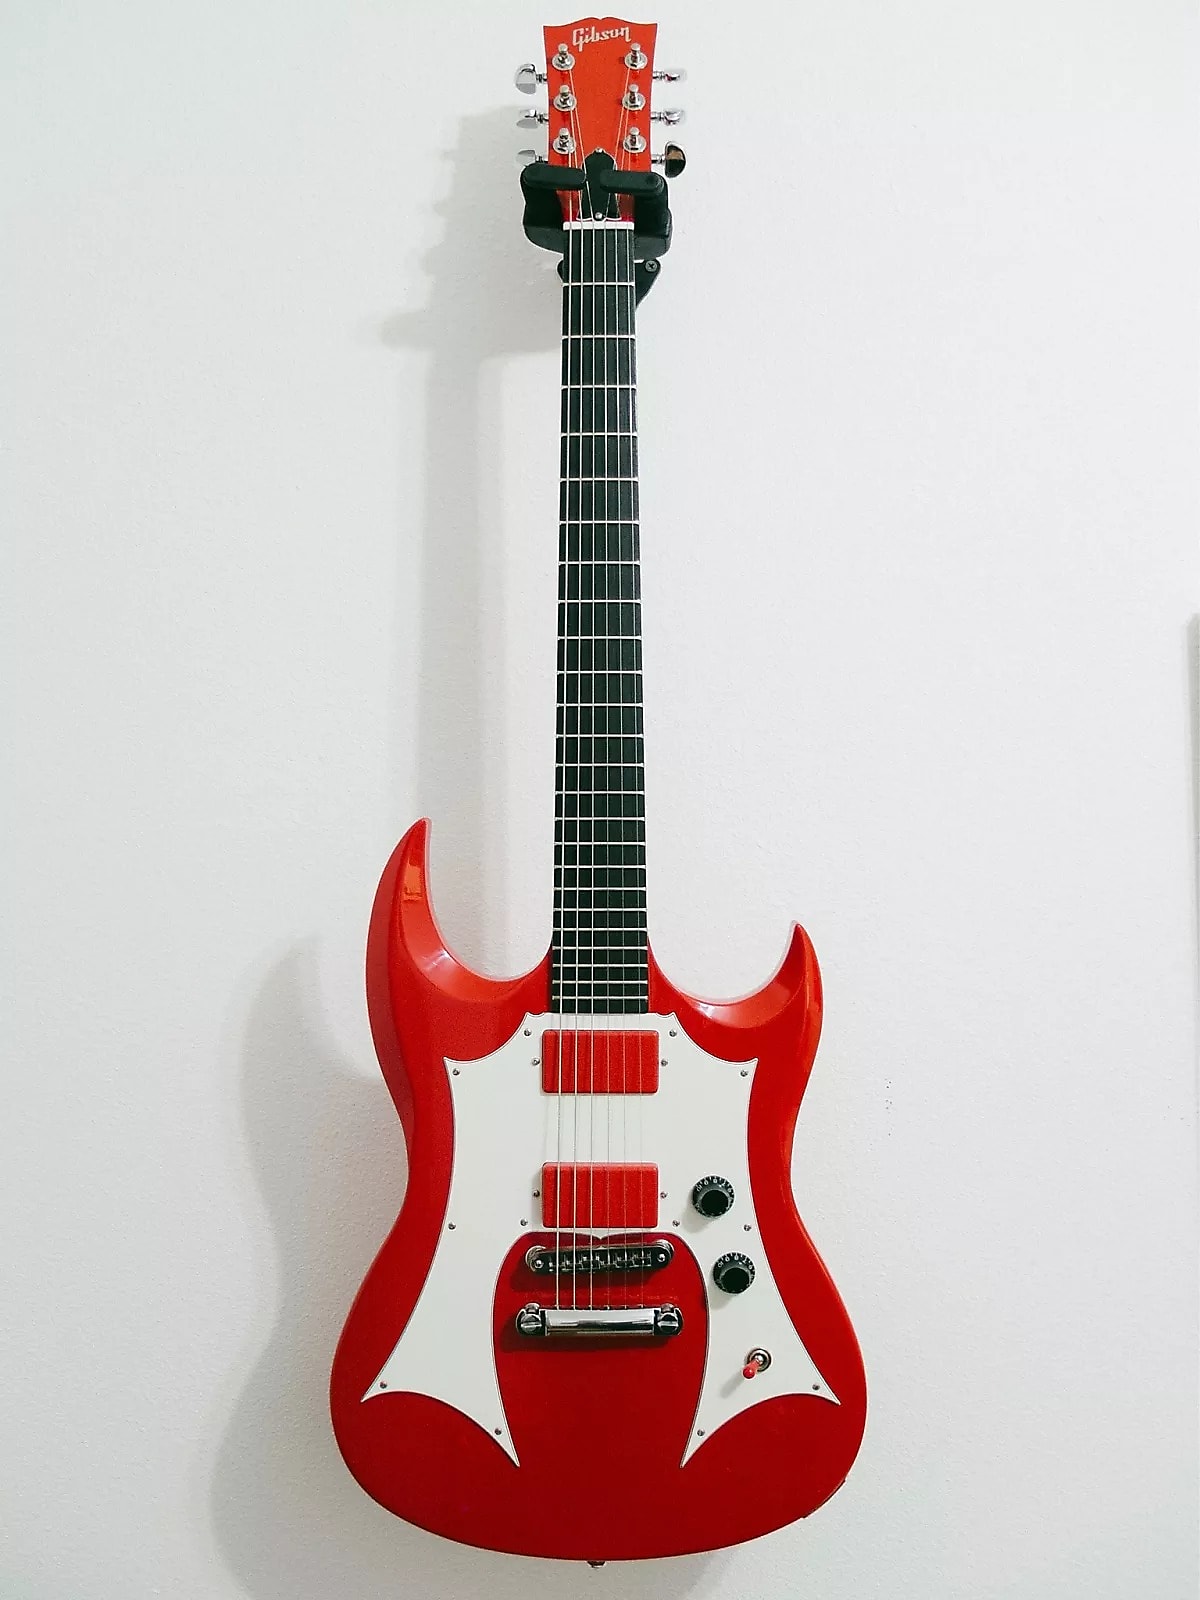 2009 Gibson Limited Edition Eye Guitar Fire Engine Red #25/350 ~Video